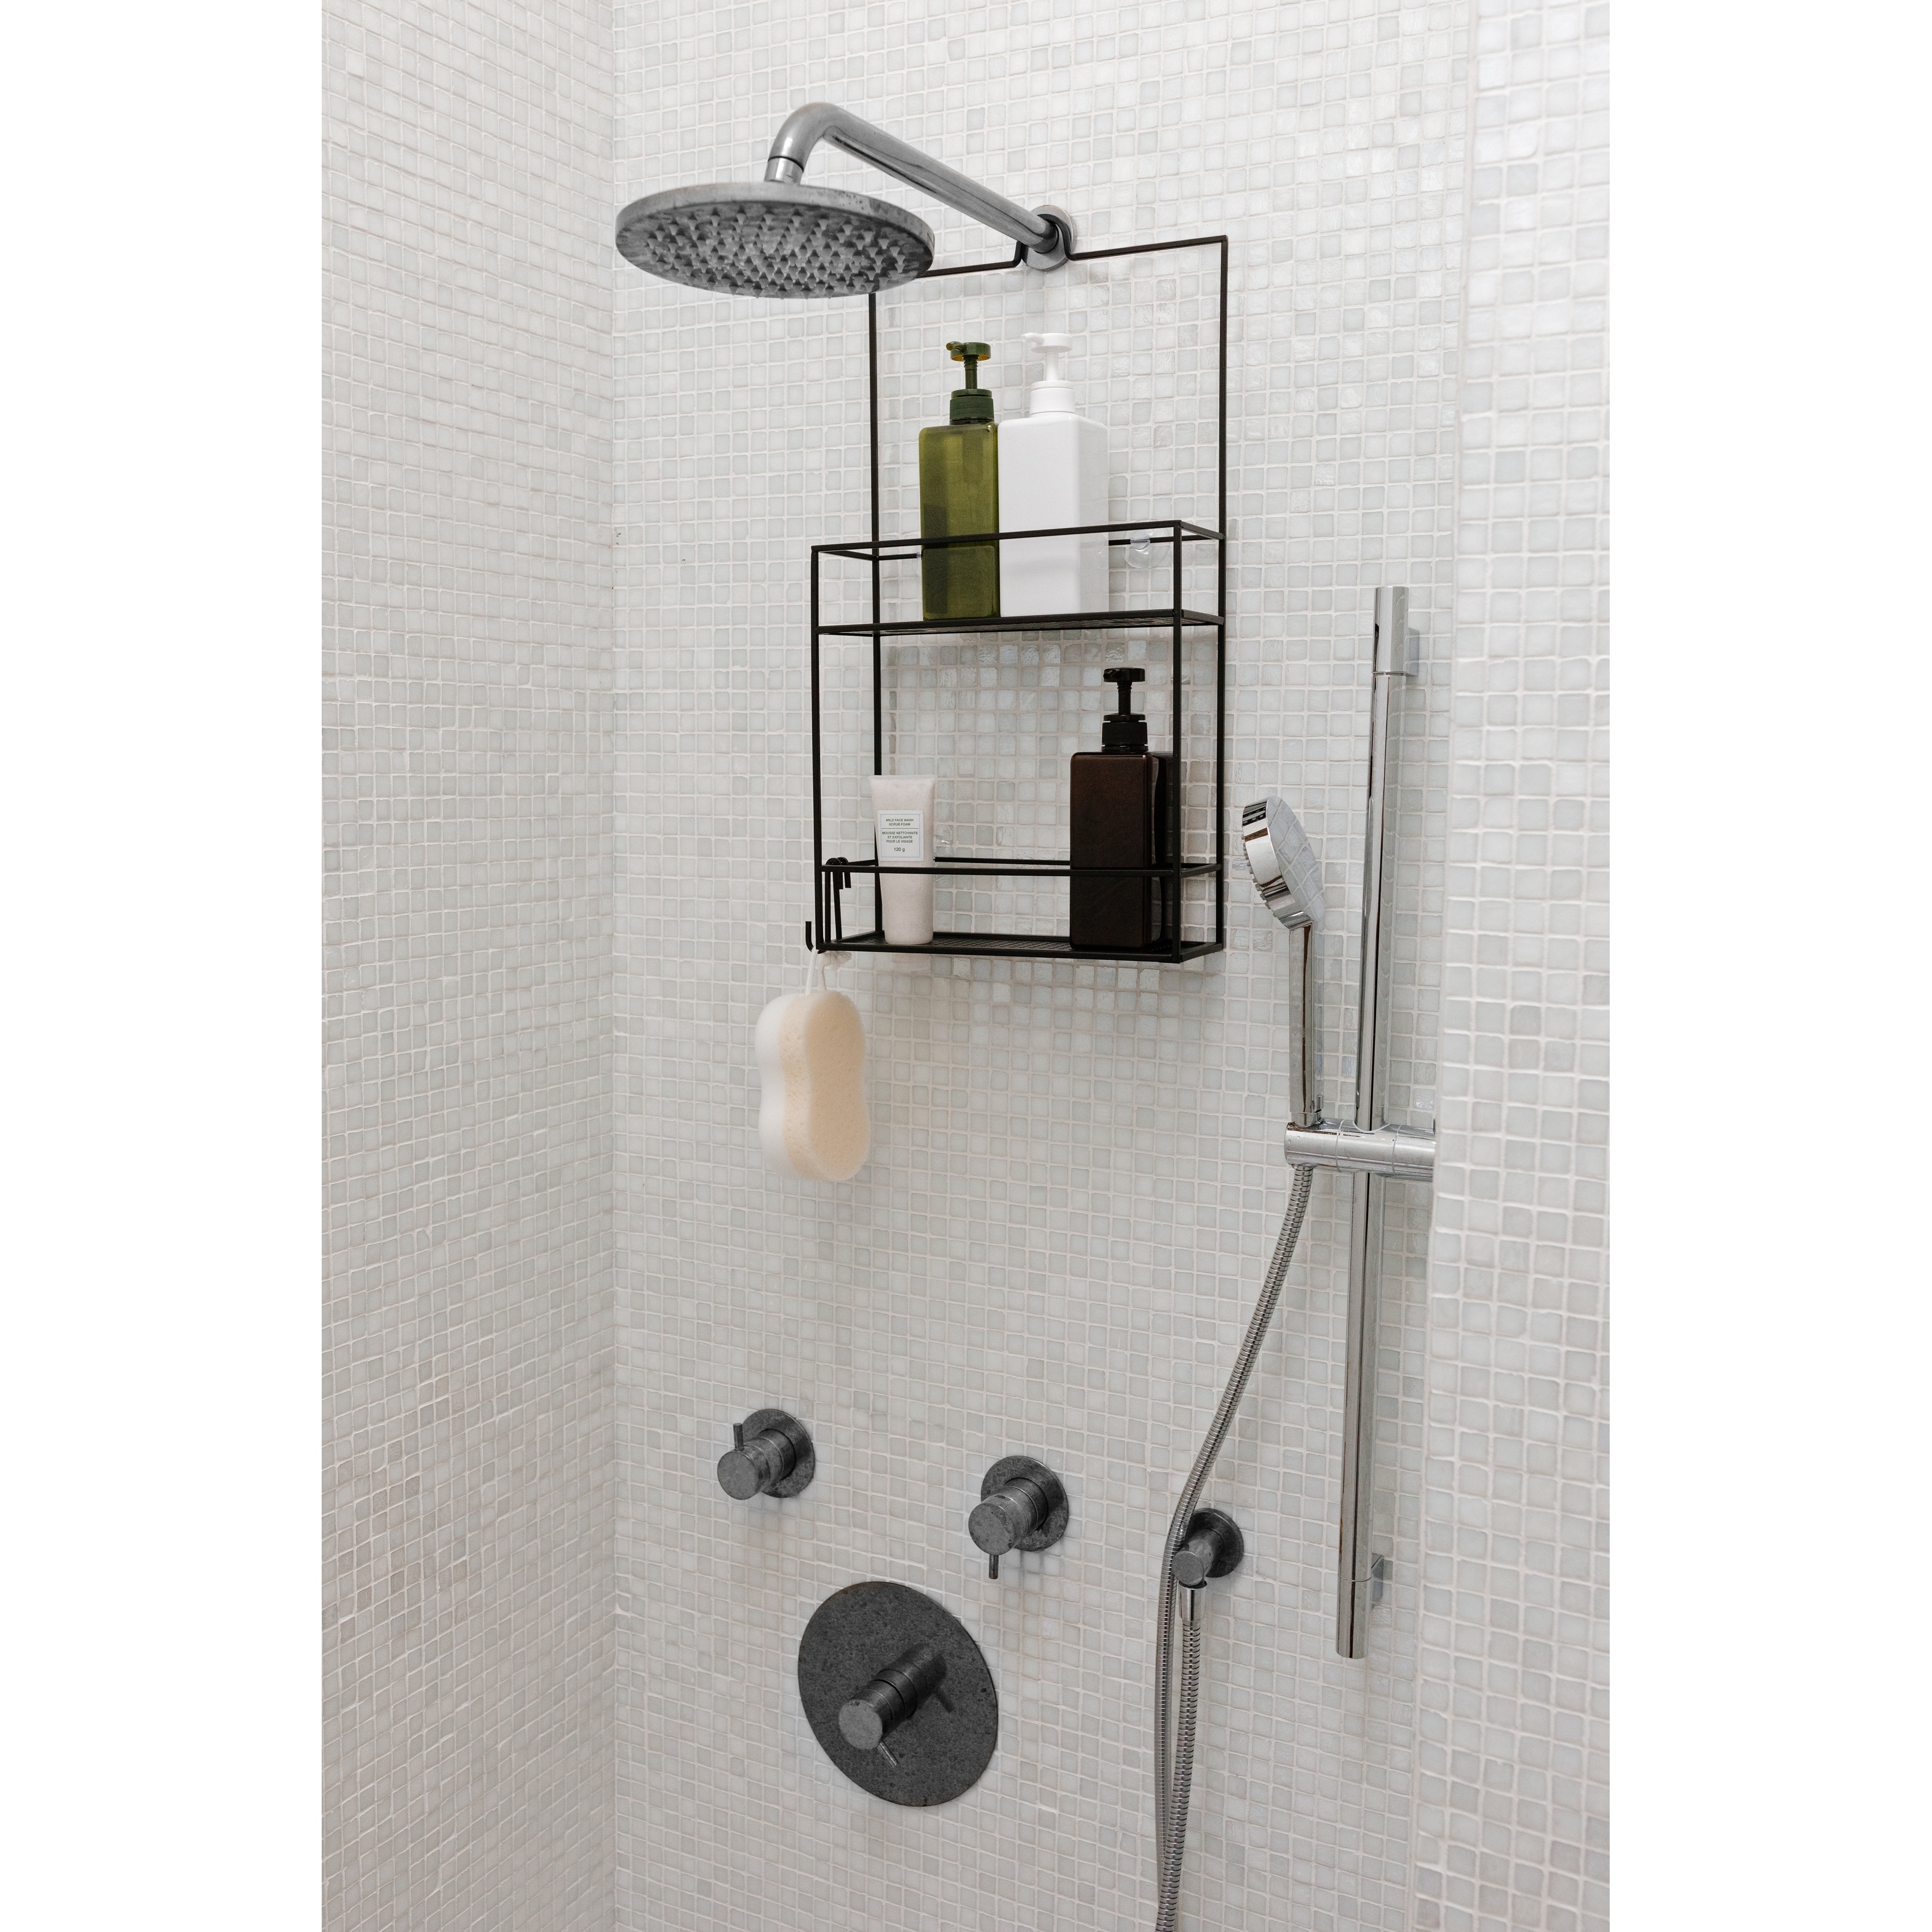 https://ak1.ostkcdn.com/images/products/is/images/direct/49c7010cde512a7744f6770318f0ca3c9a53f2c6/Umbra-CUBIKO-Shower-Caddy.jpg